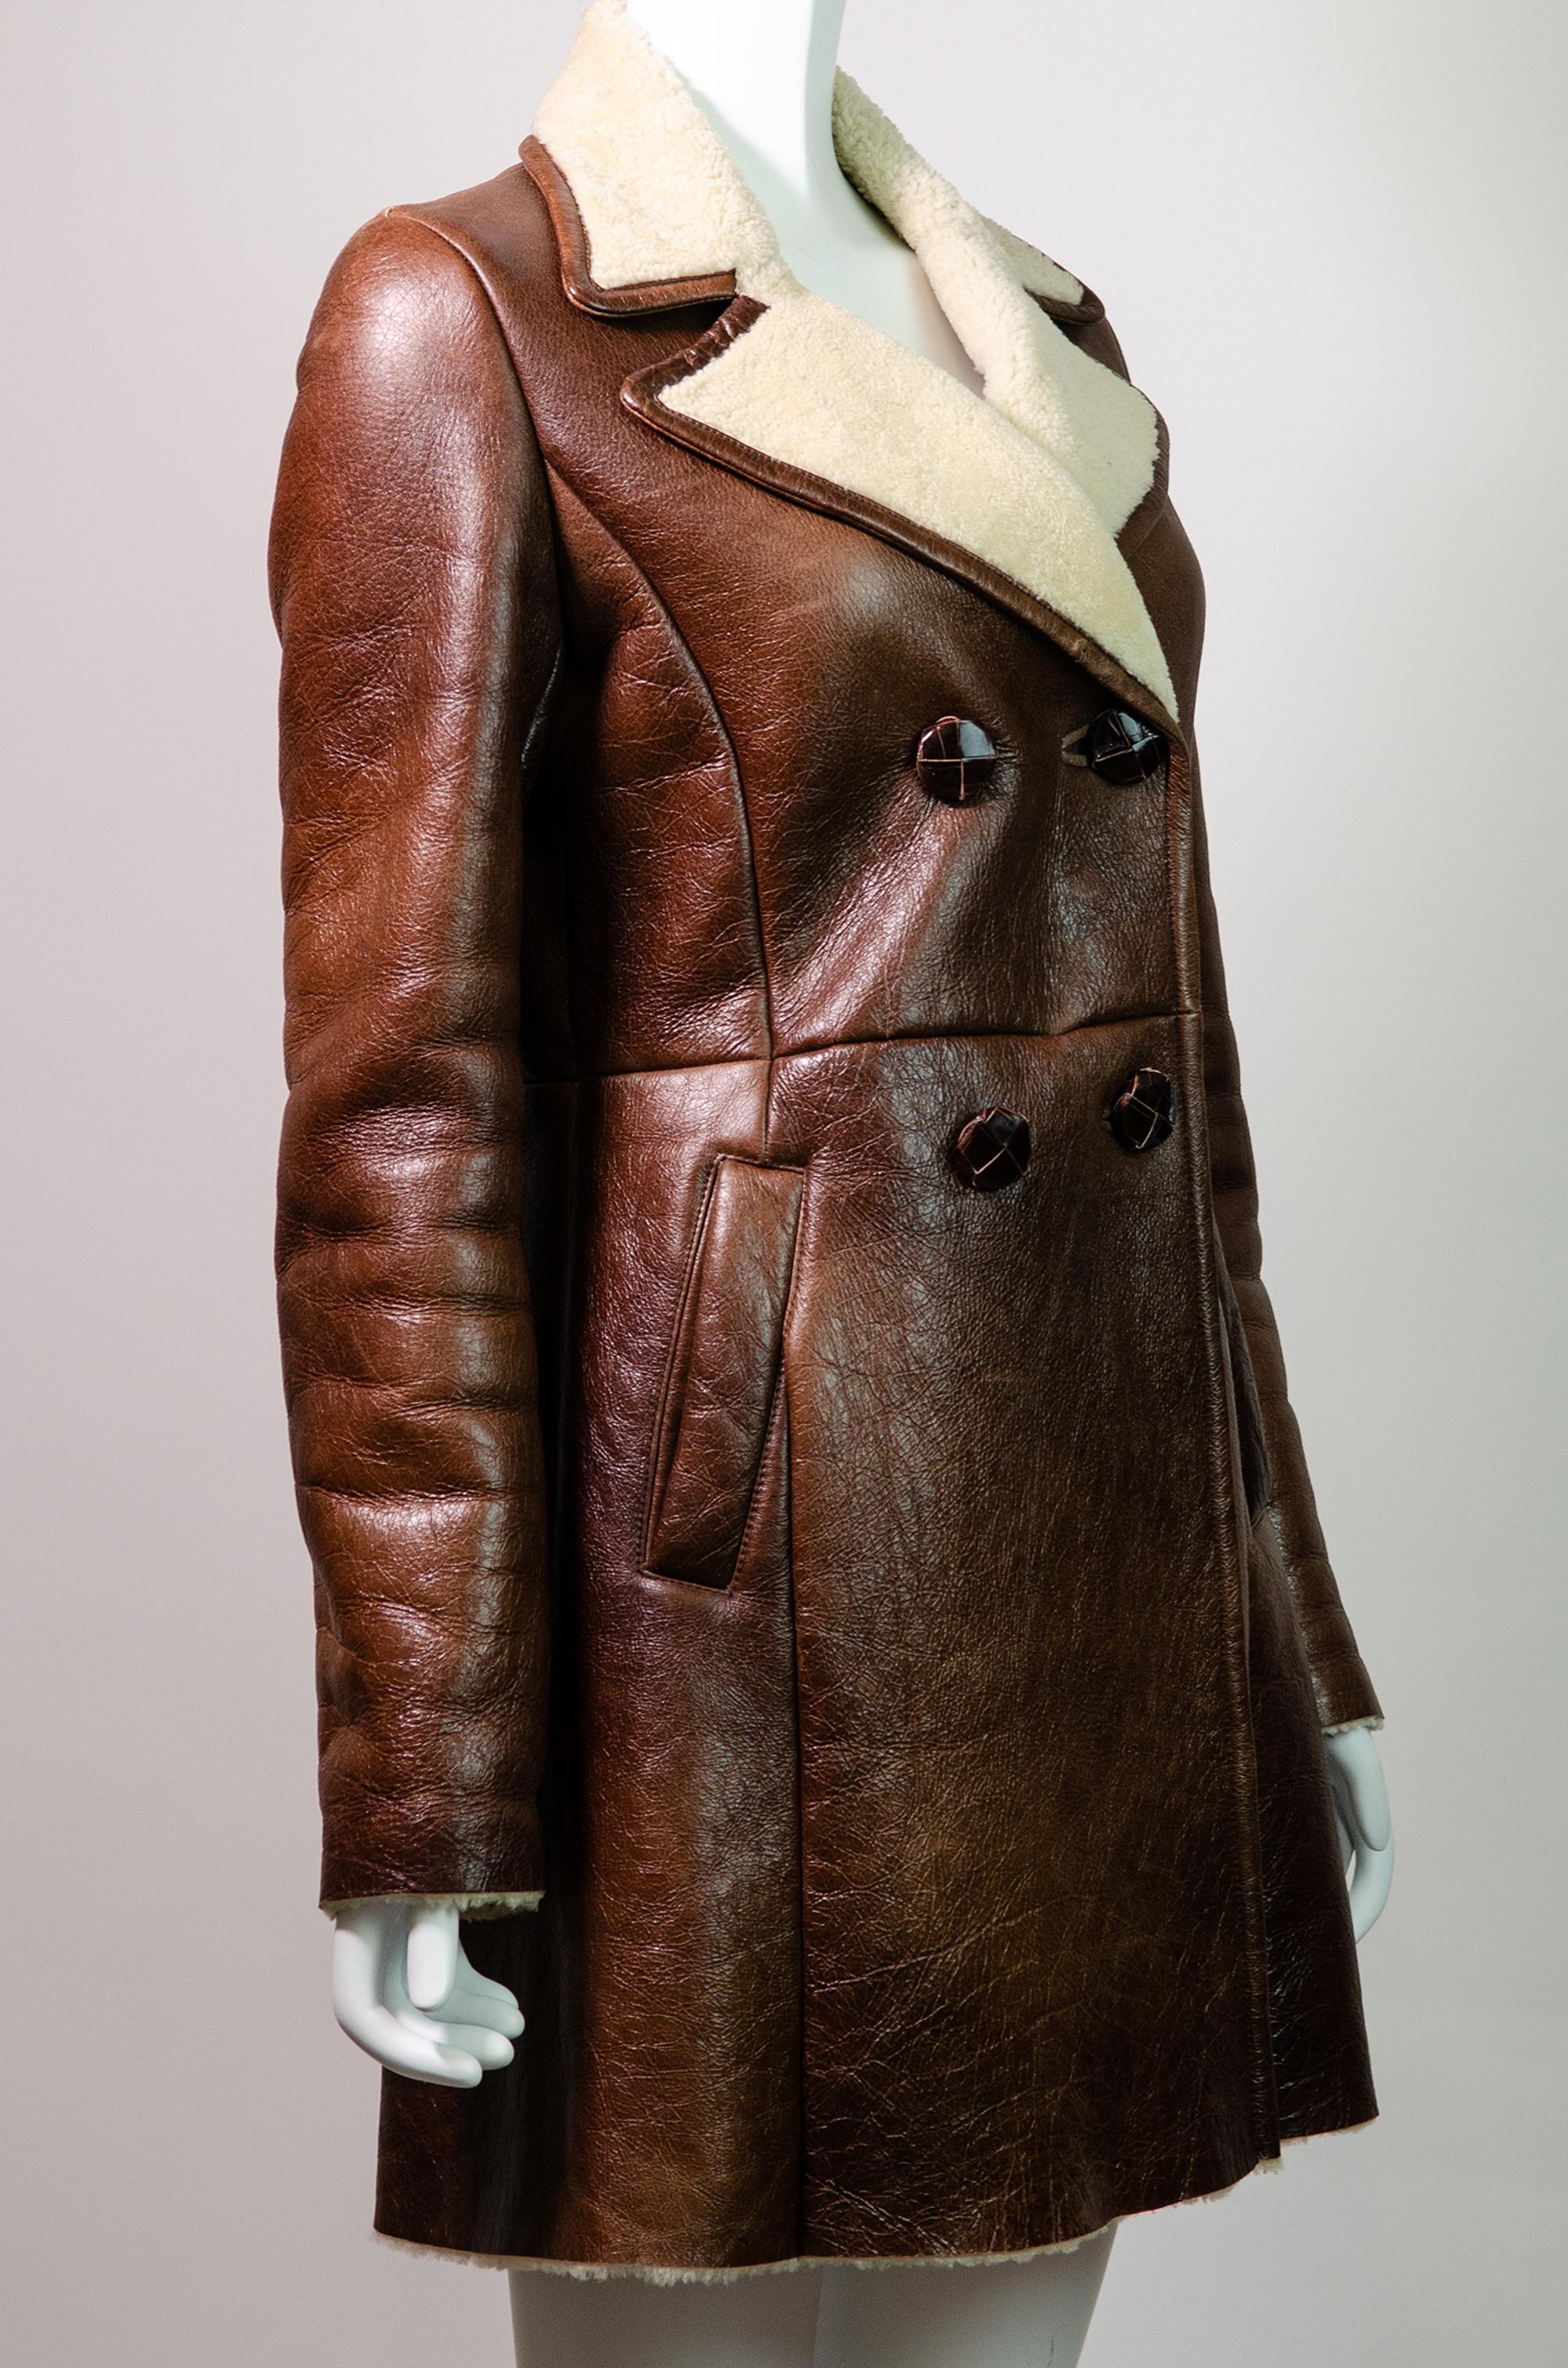 PRADA 2010 Shearling Double-breasted Brown Coat For Sale 1